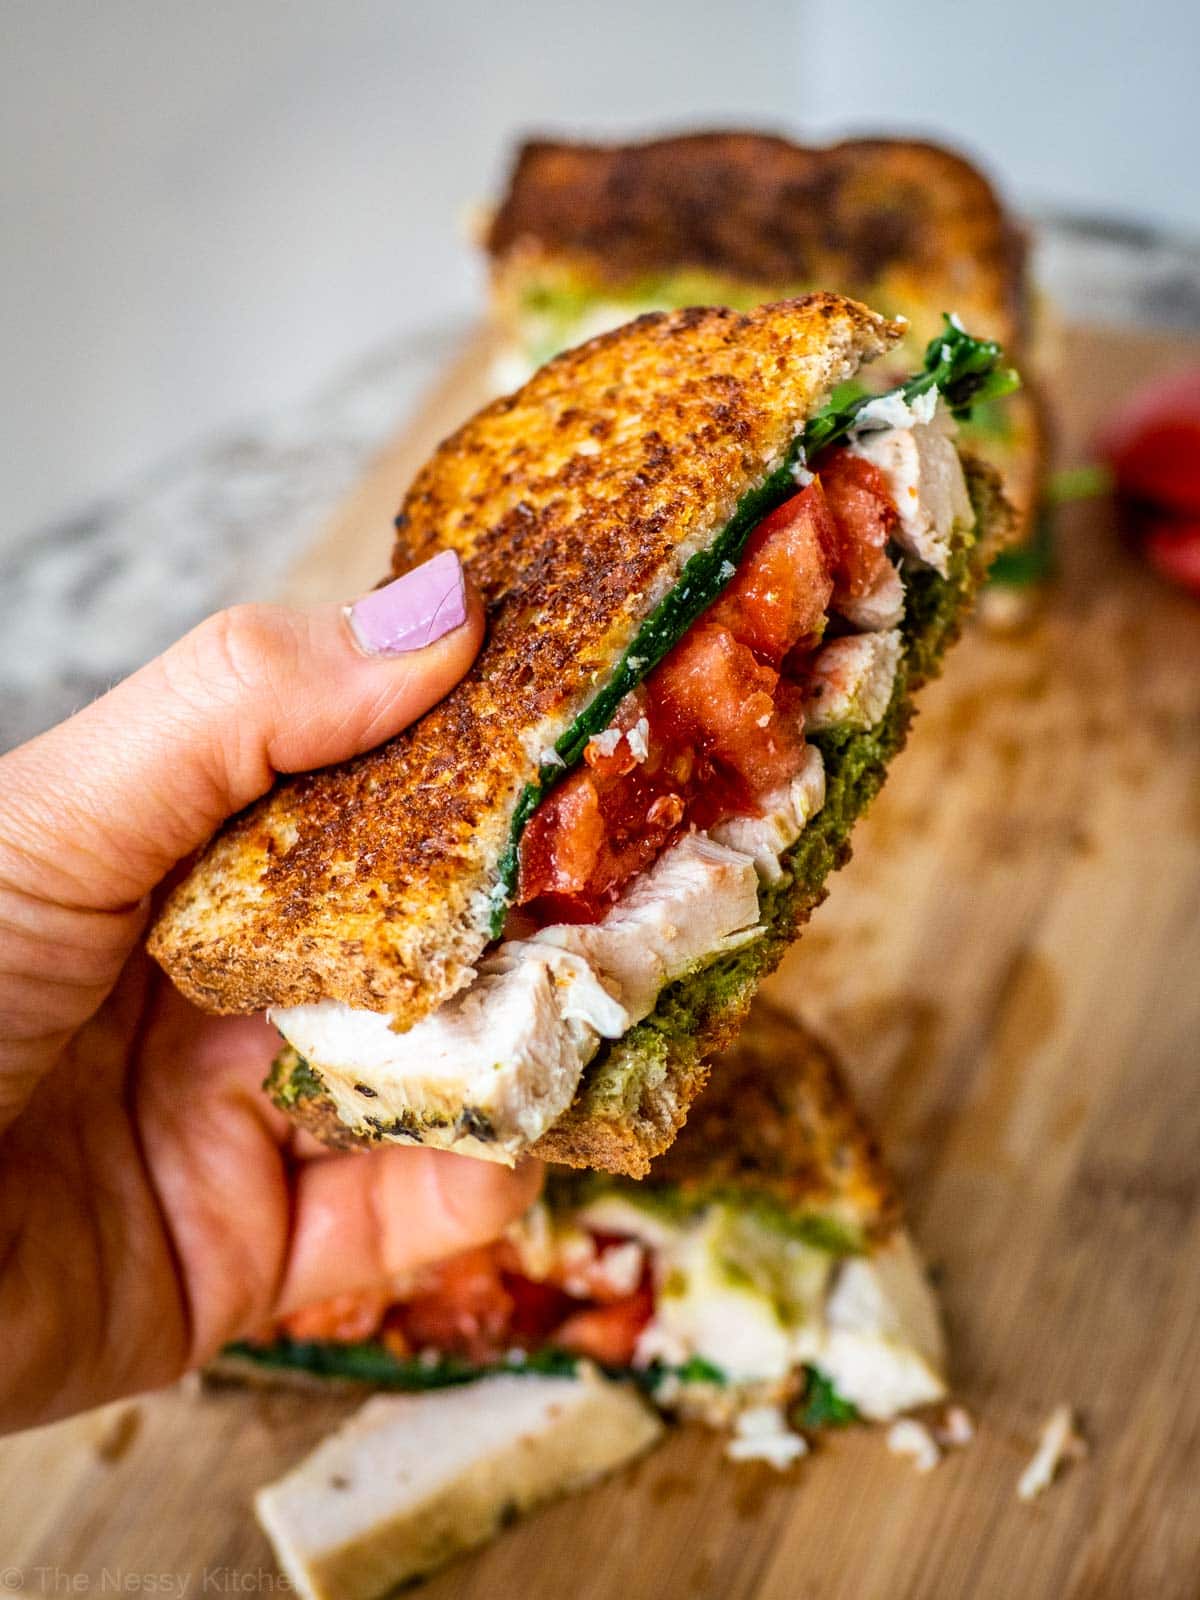 Hand holding a turkey sandwich with tomatoes, pesto and spinach.